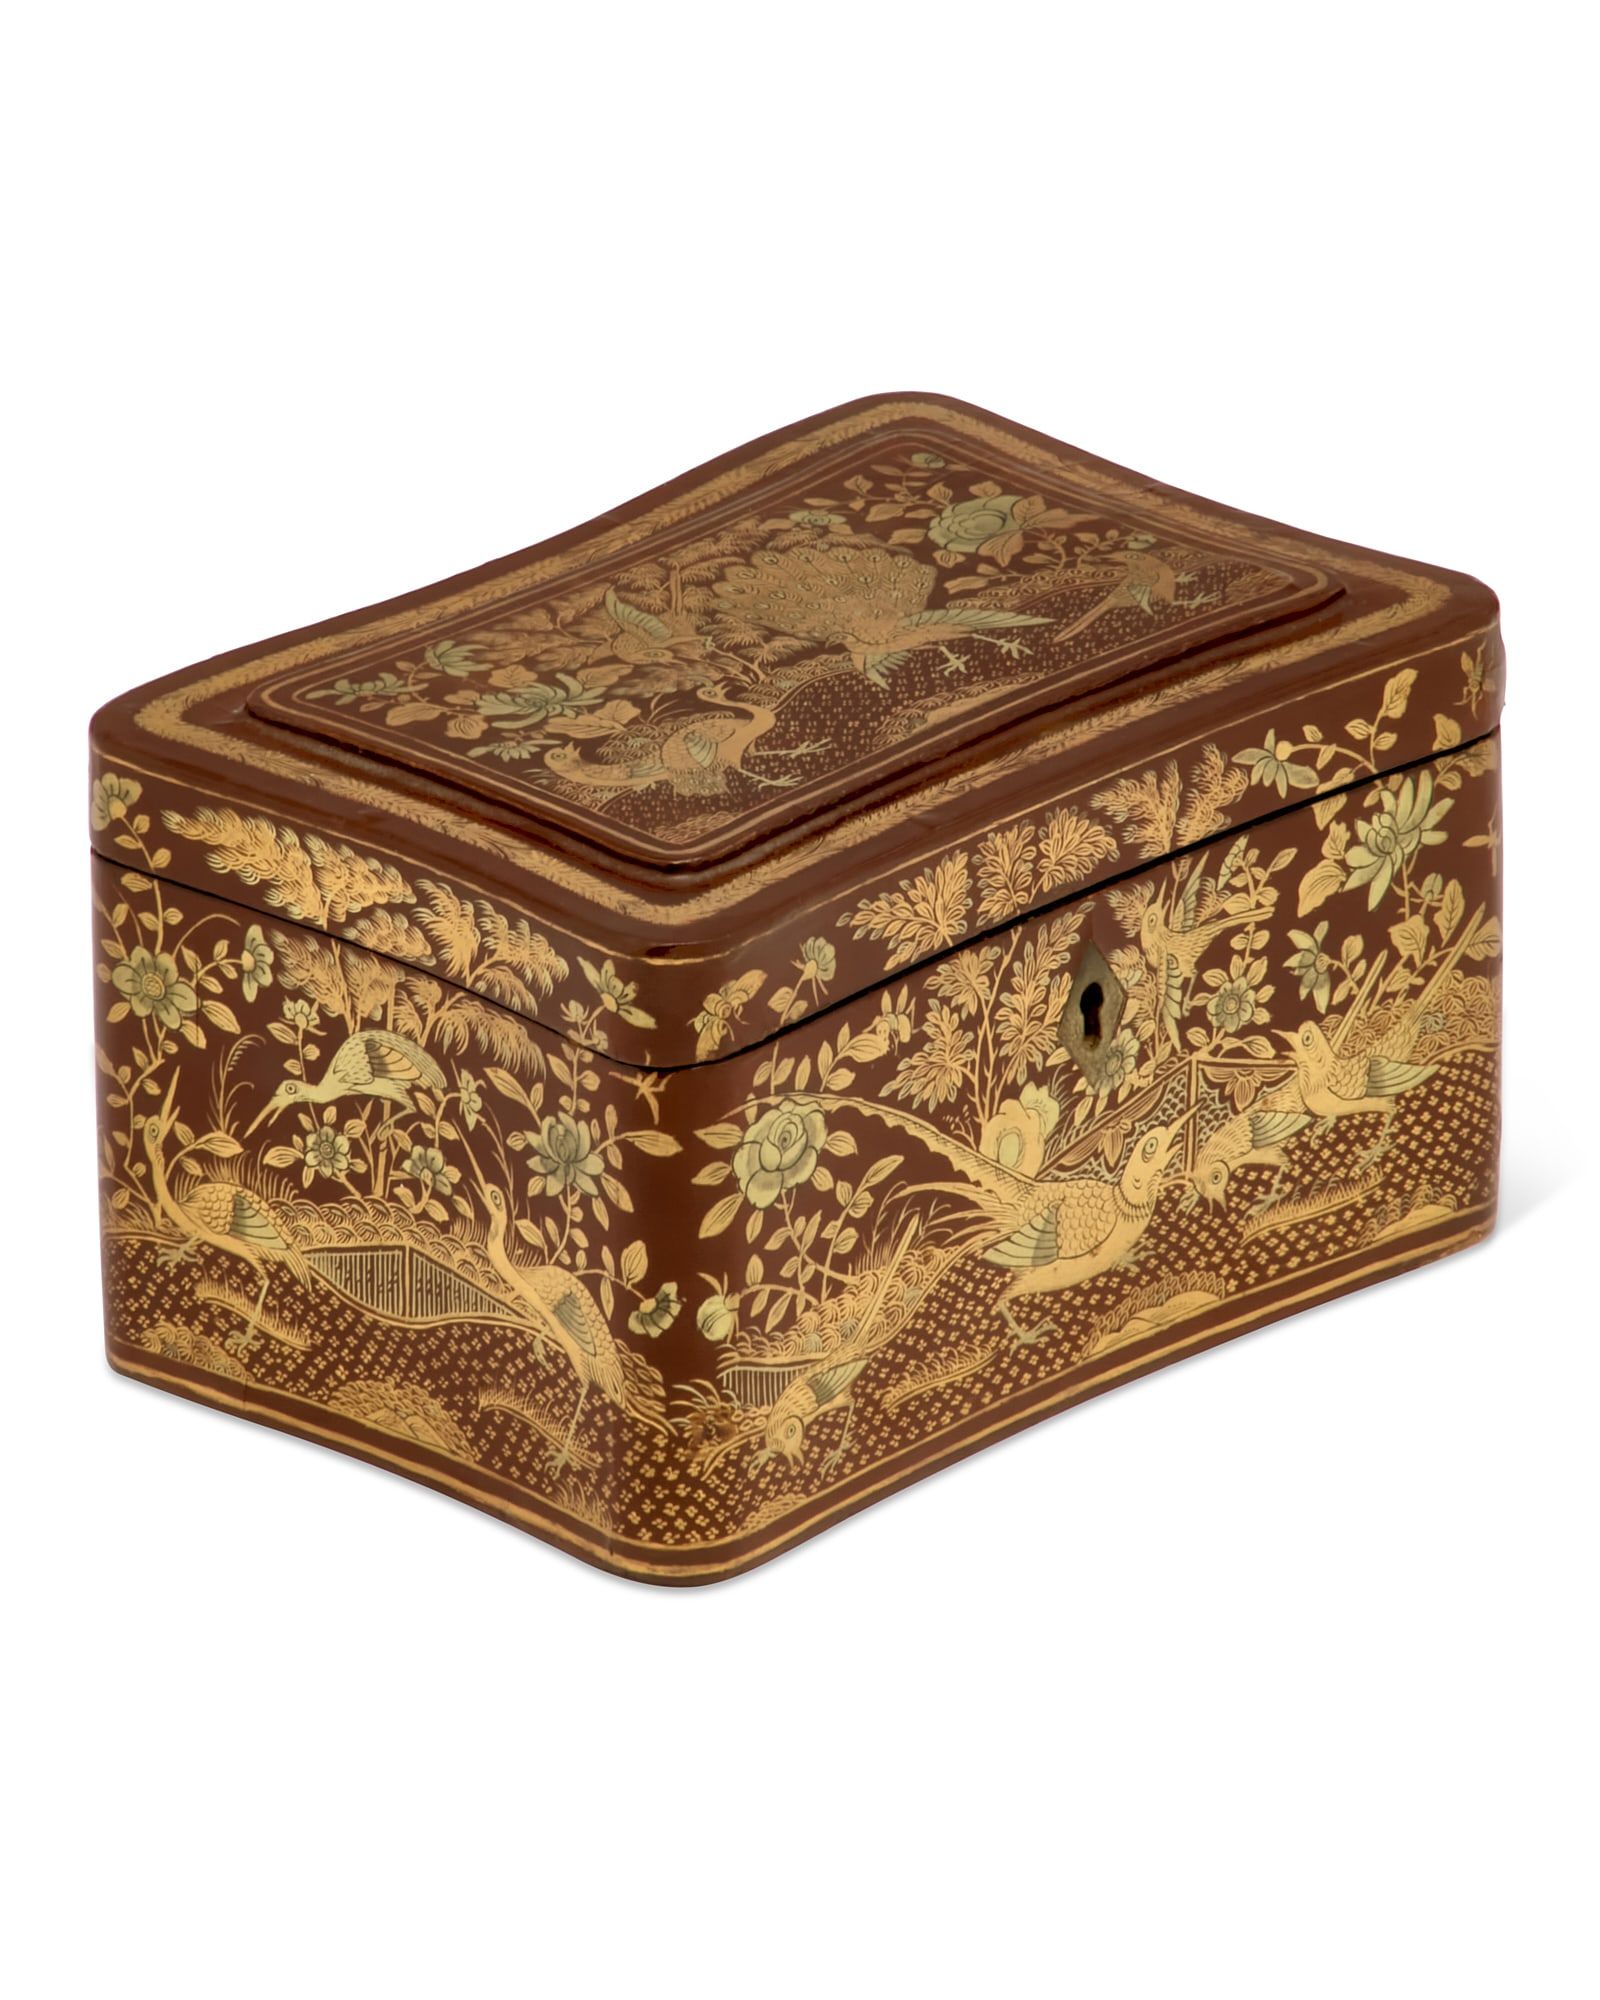 A CHINESE EXPORT GILT AND RED LACQUER